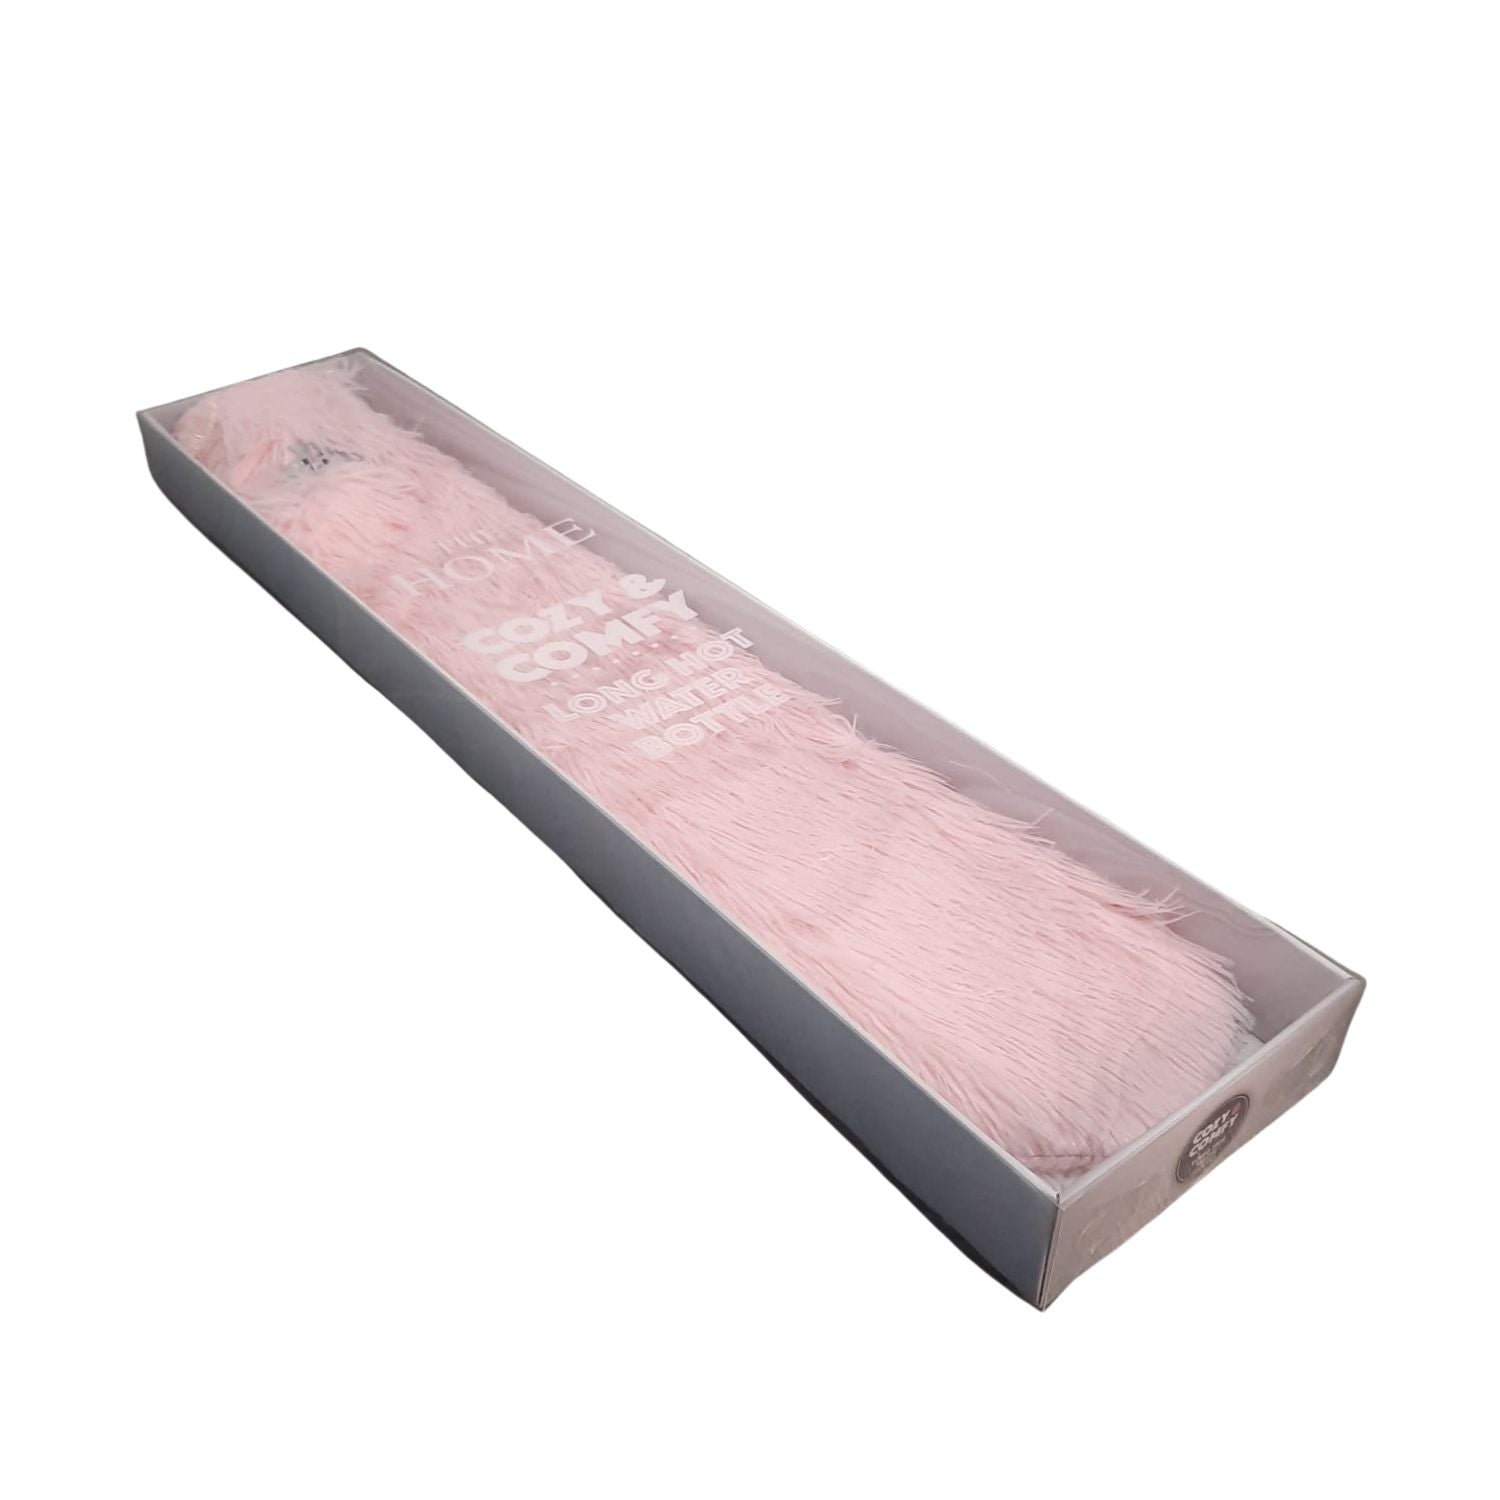 The Home Bedroom Cosy Long Hot Water Bottle - Blush 1 Shaws Department Stores